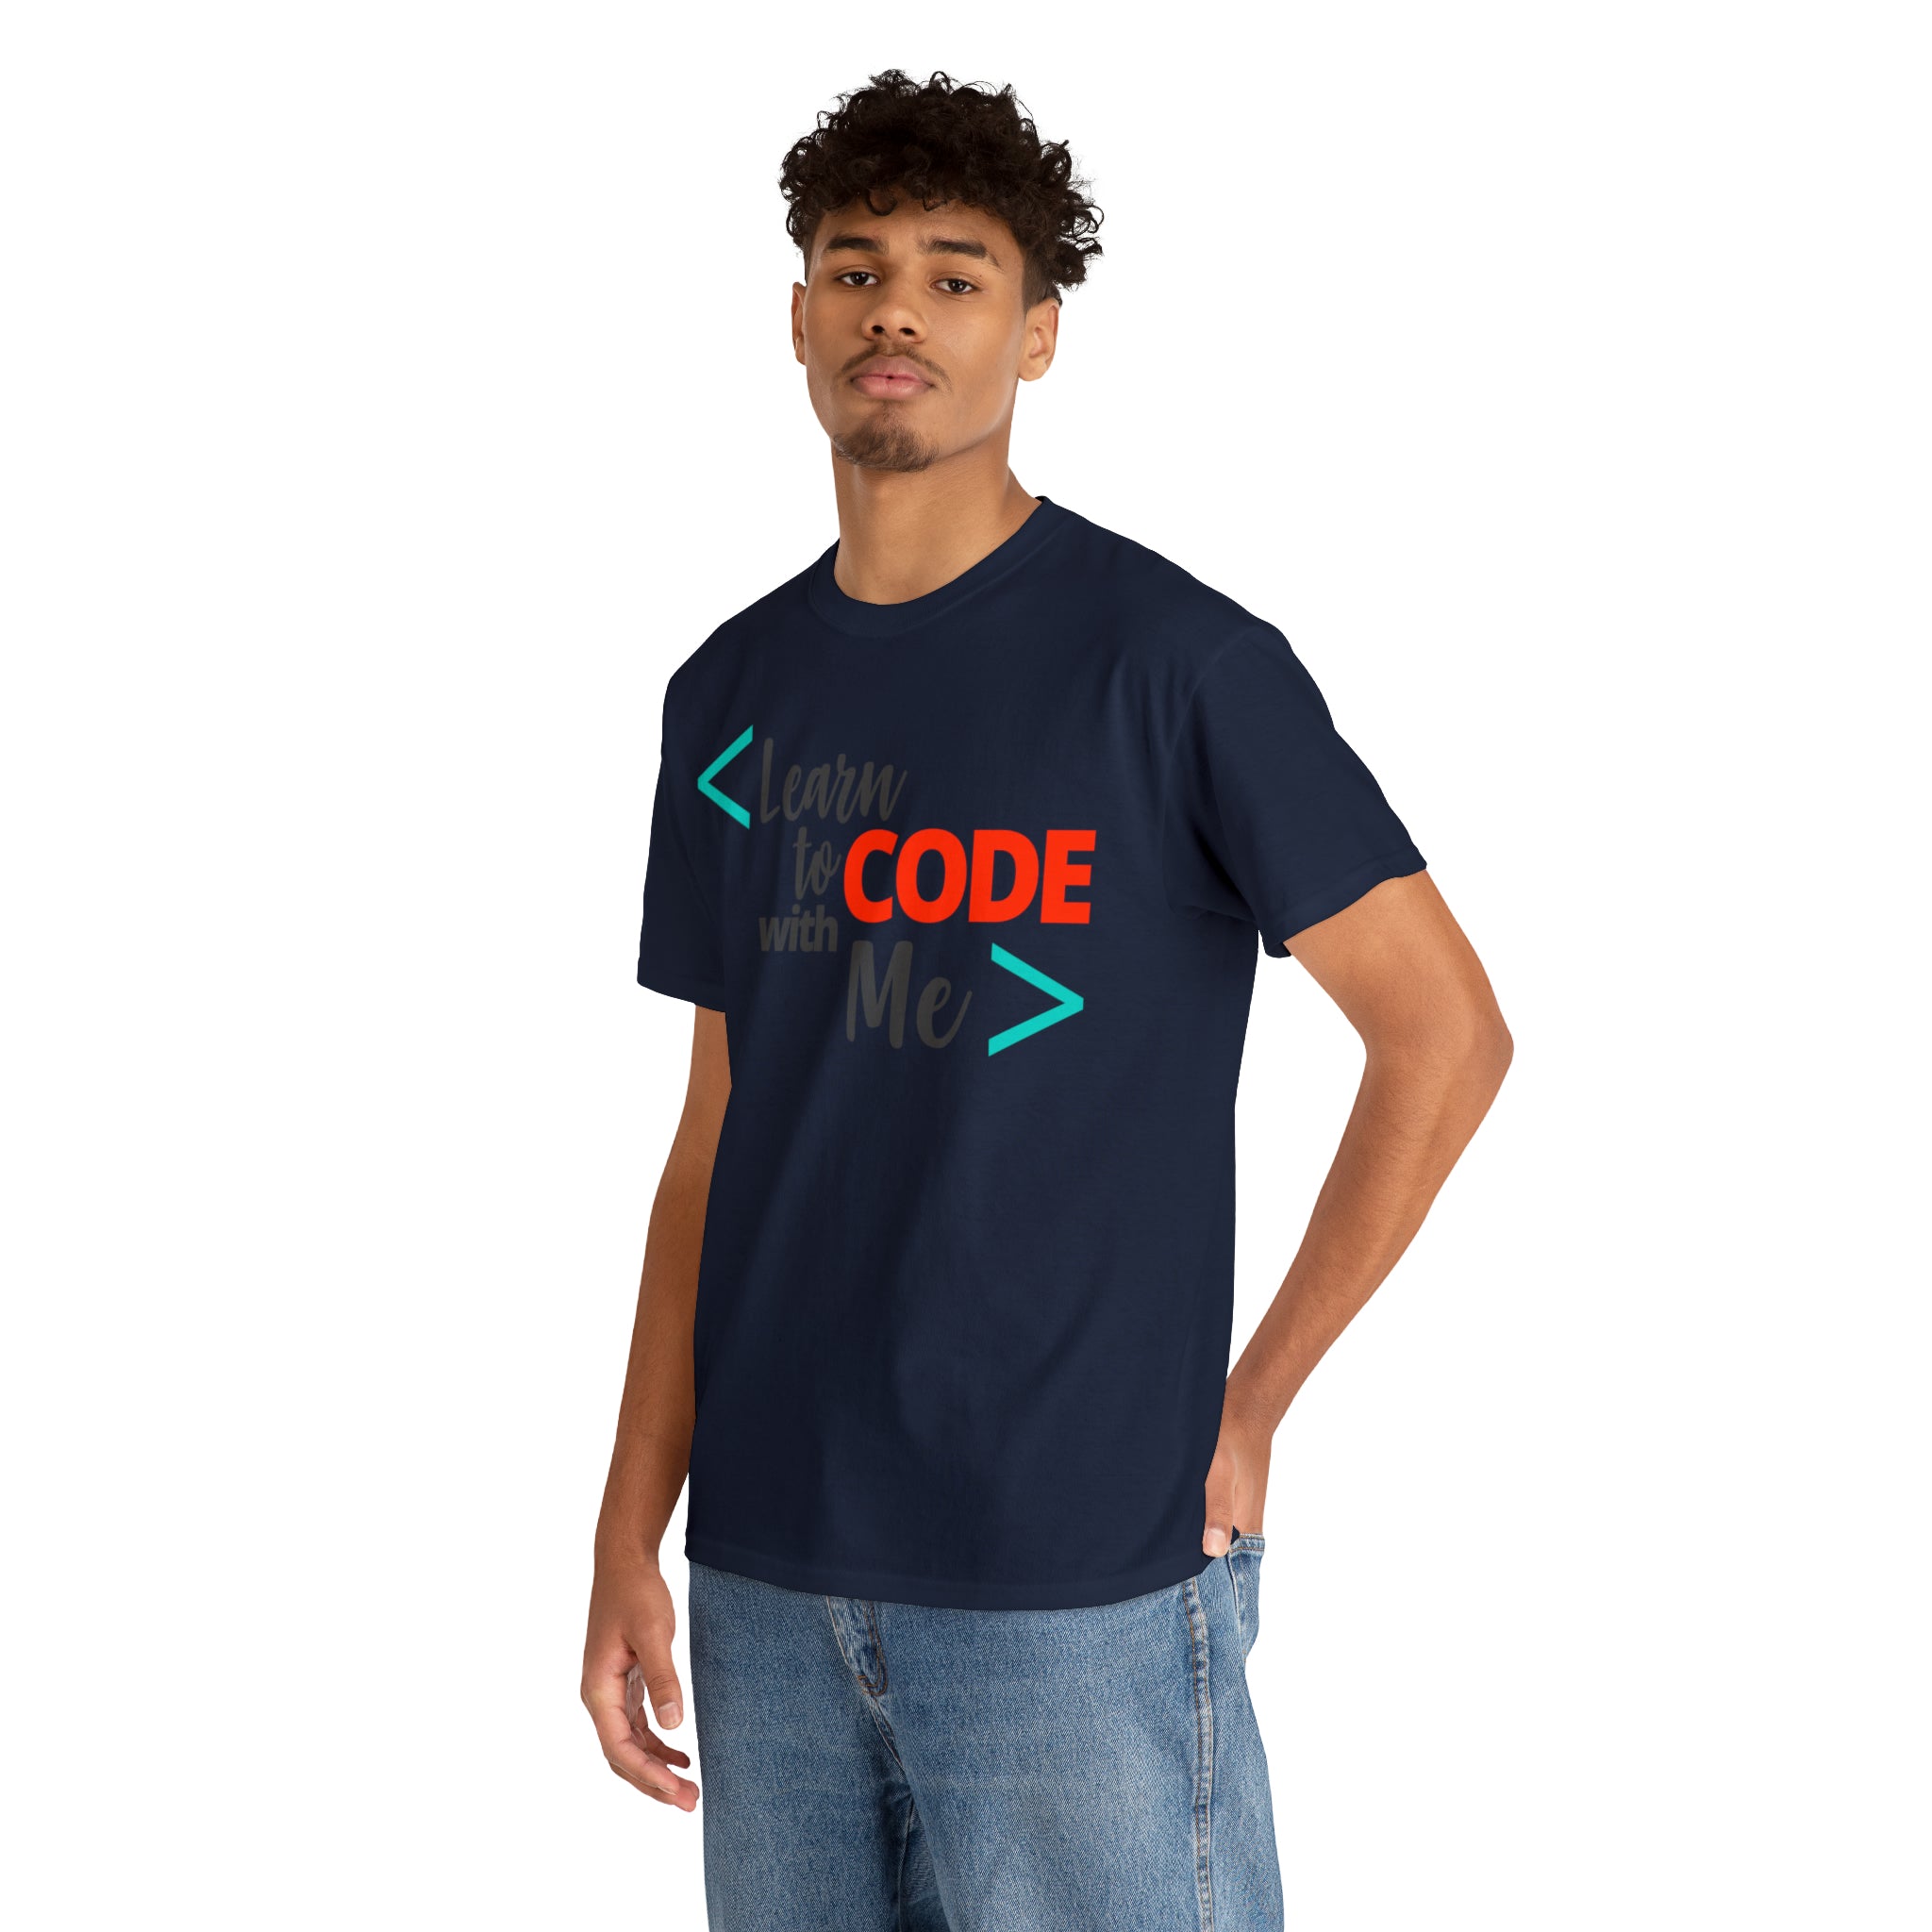 Learn to Code with Me T-Shirt Design by C&C